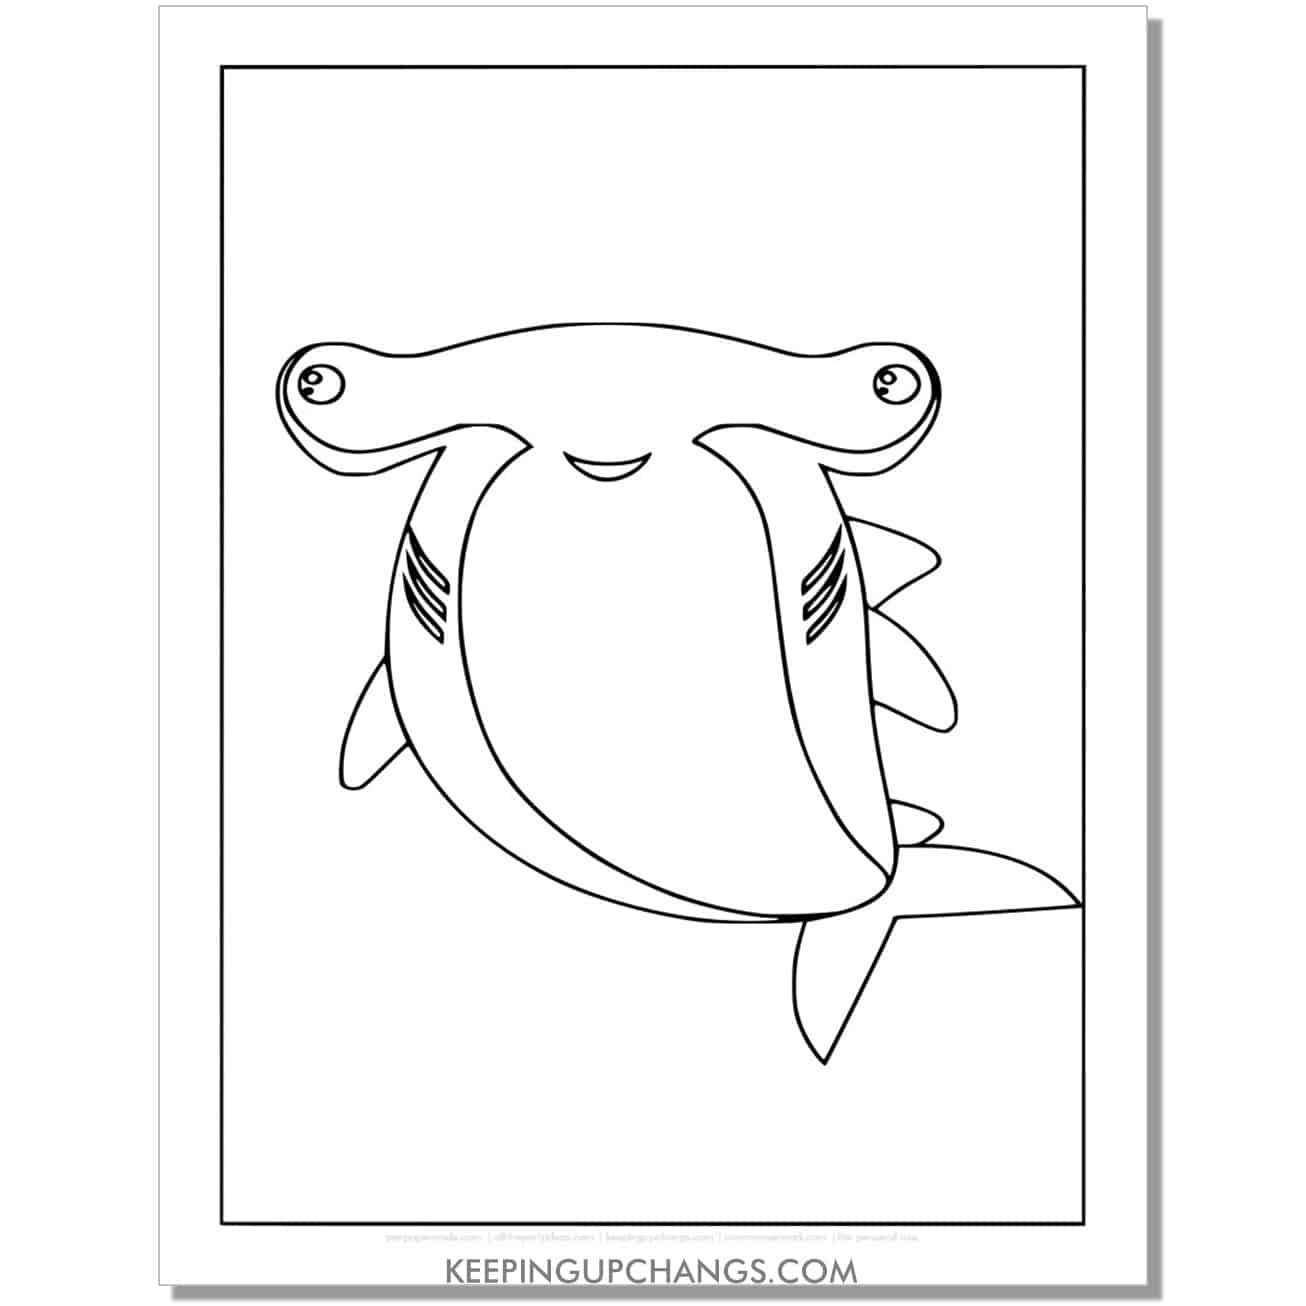 free wide hammerhead shark coloring page, sheet.